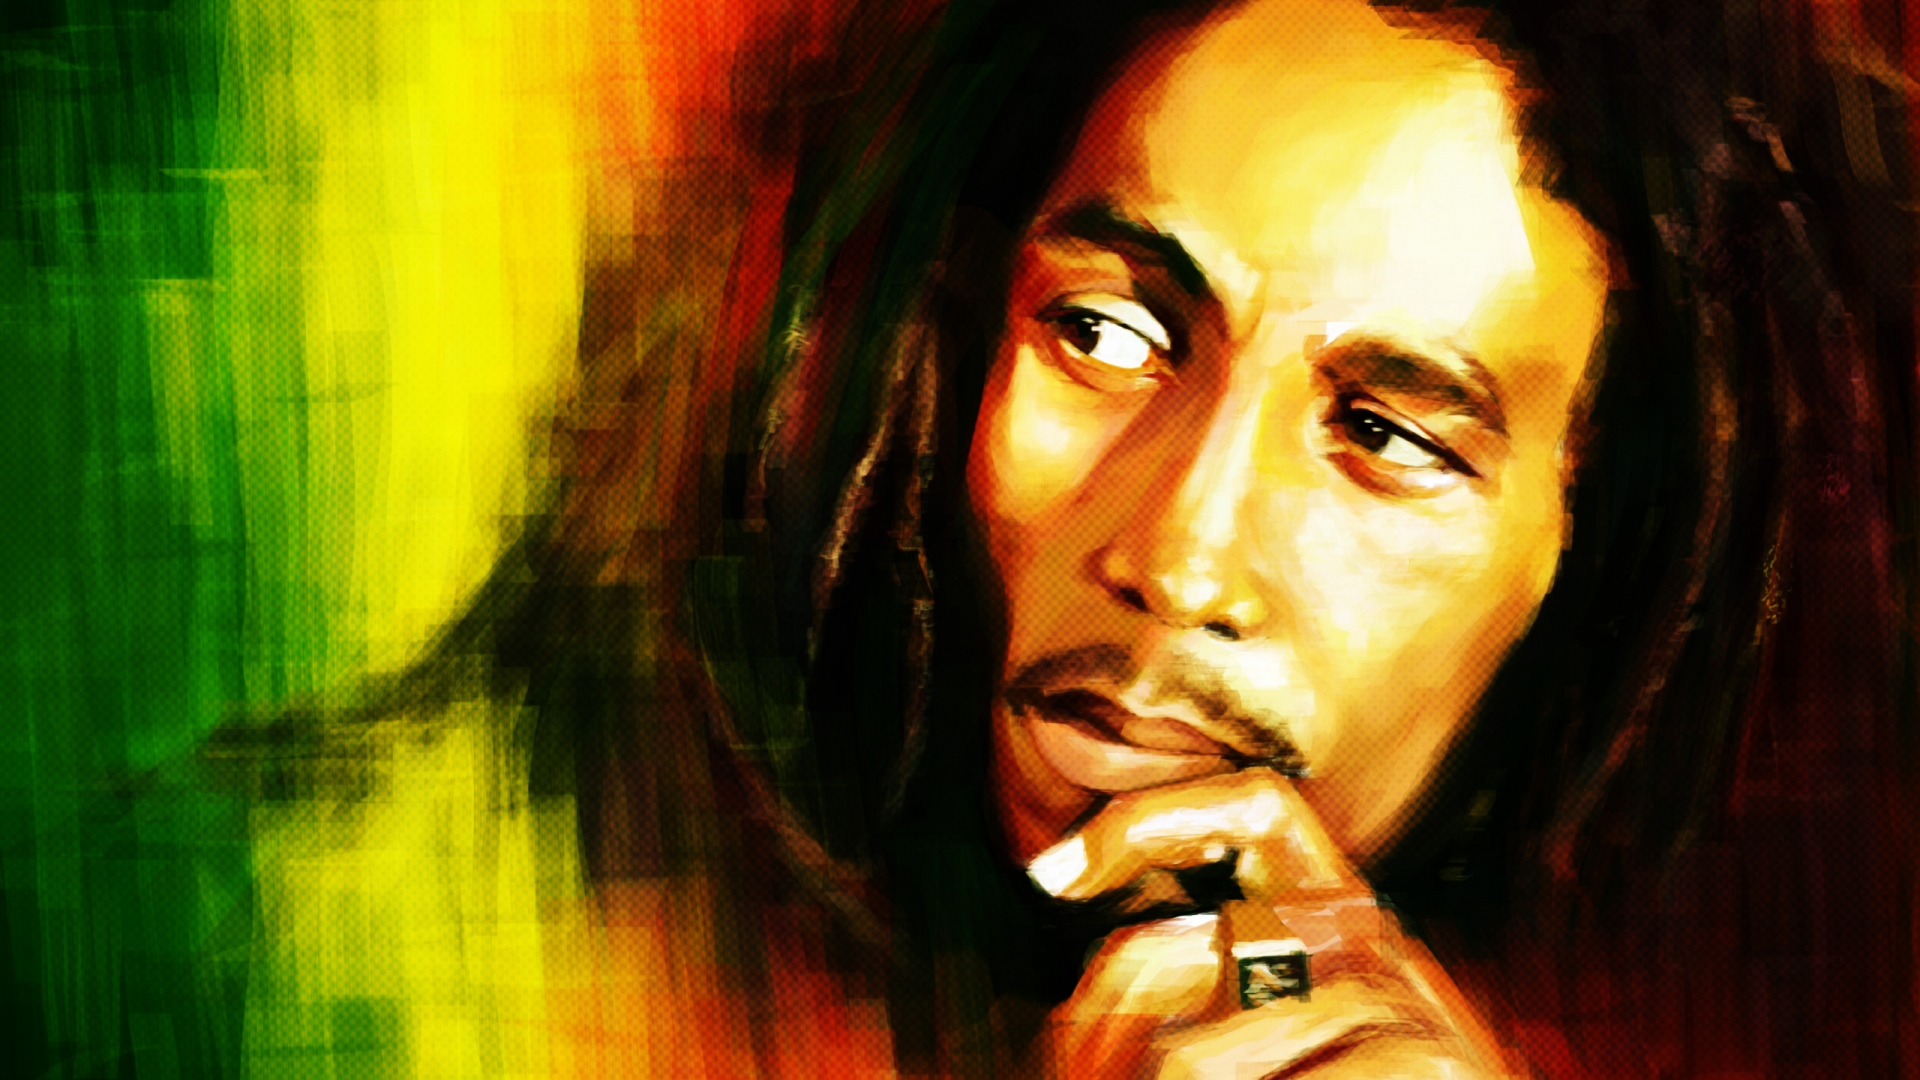 Marley Portrait Painting High Definition Wallpaper HD